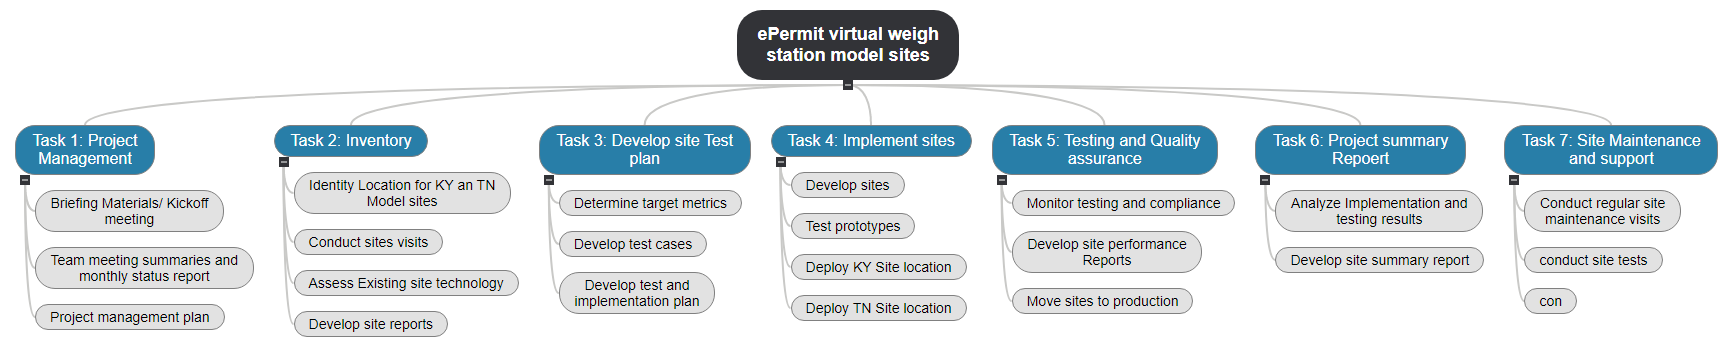 ePermit virtual weigh station model sites1 WBS